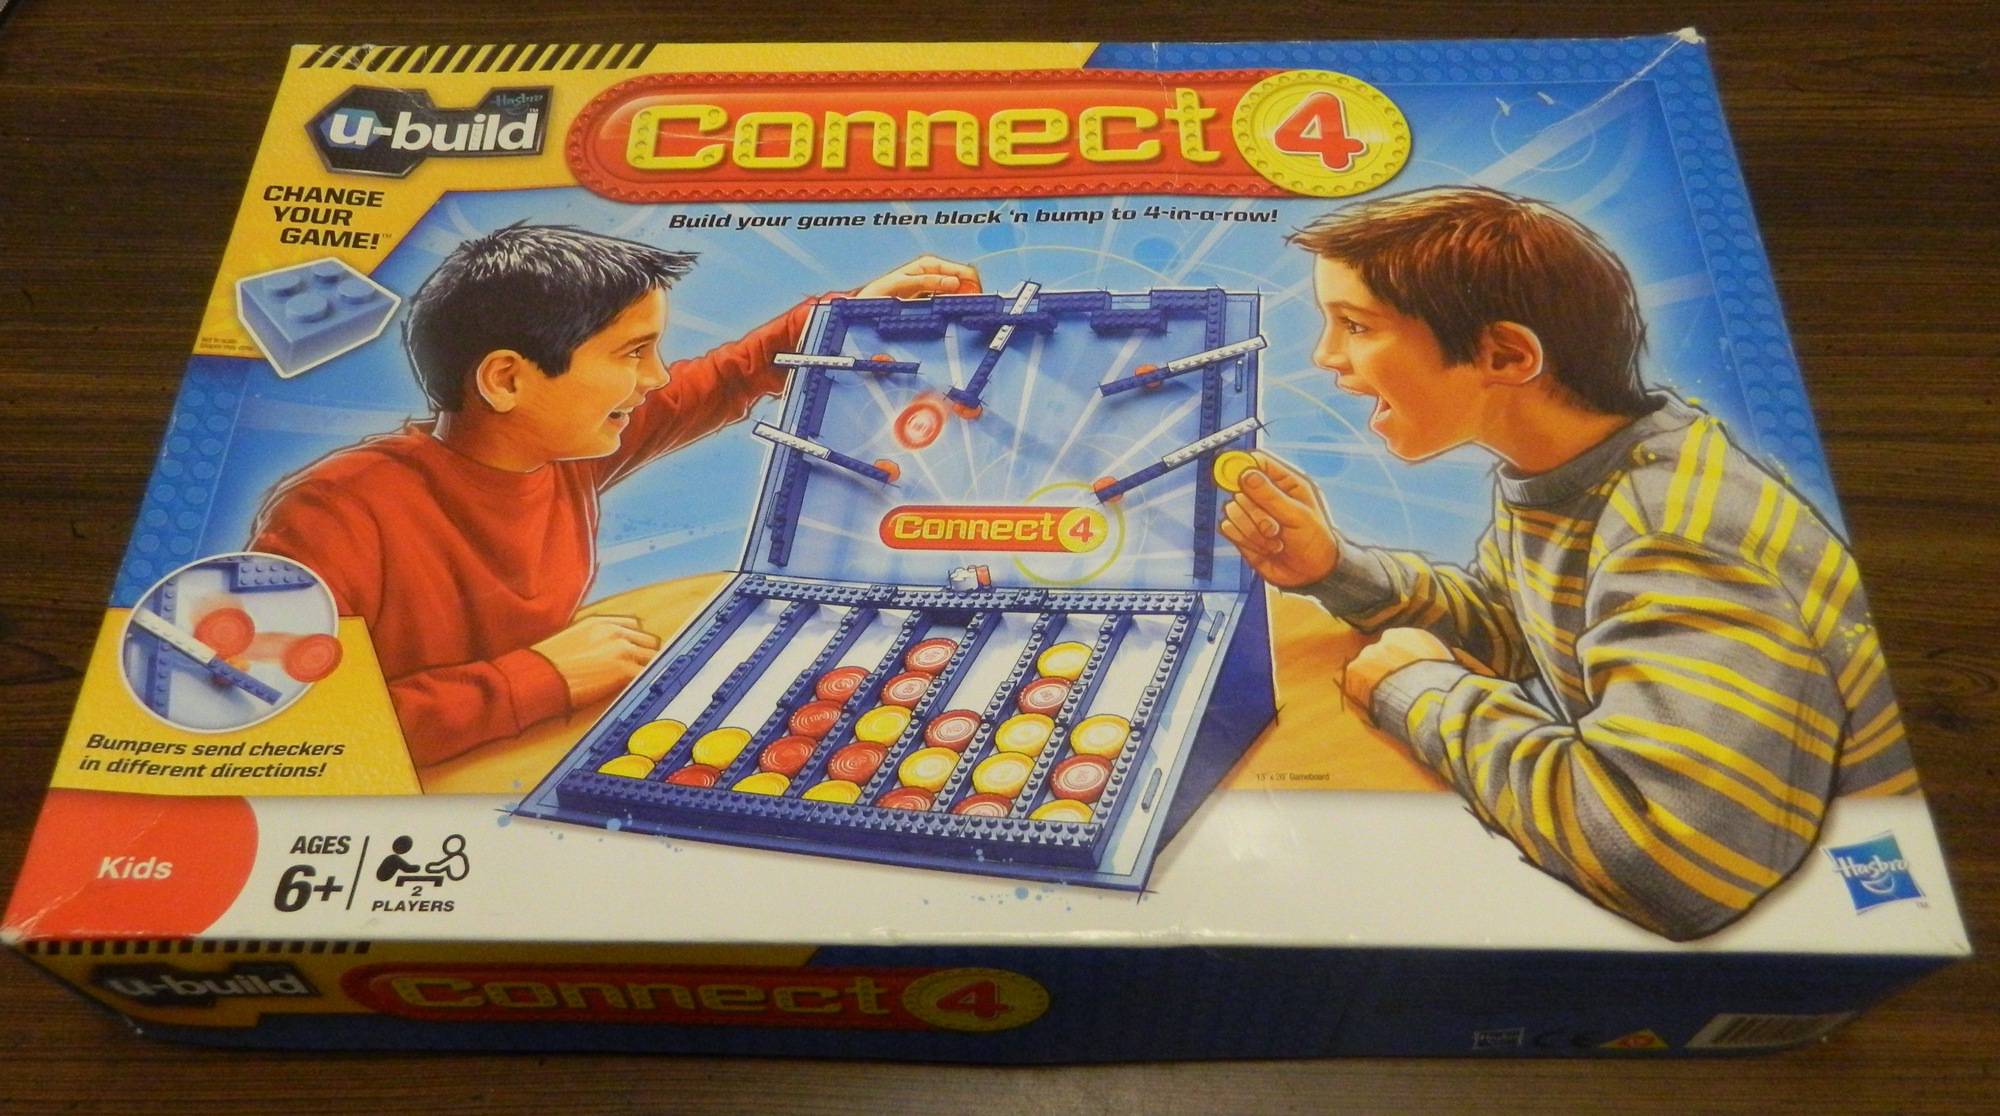 Box for U-Build Connect 4